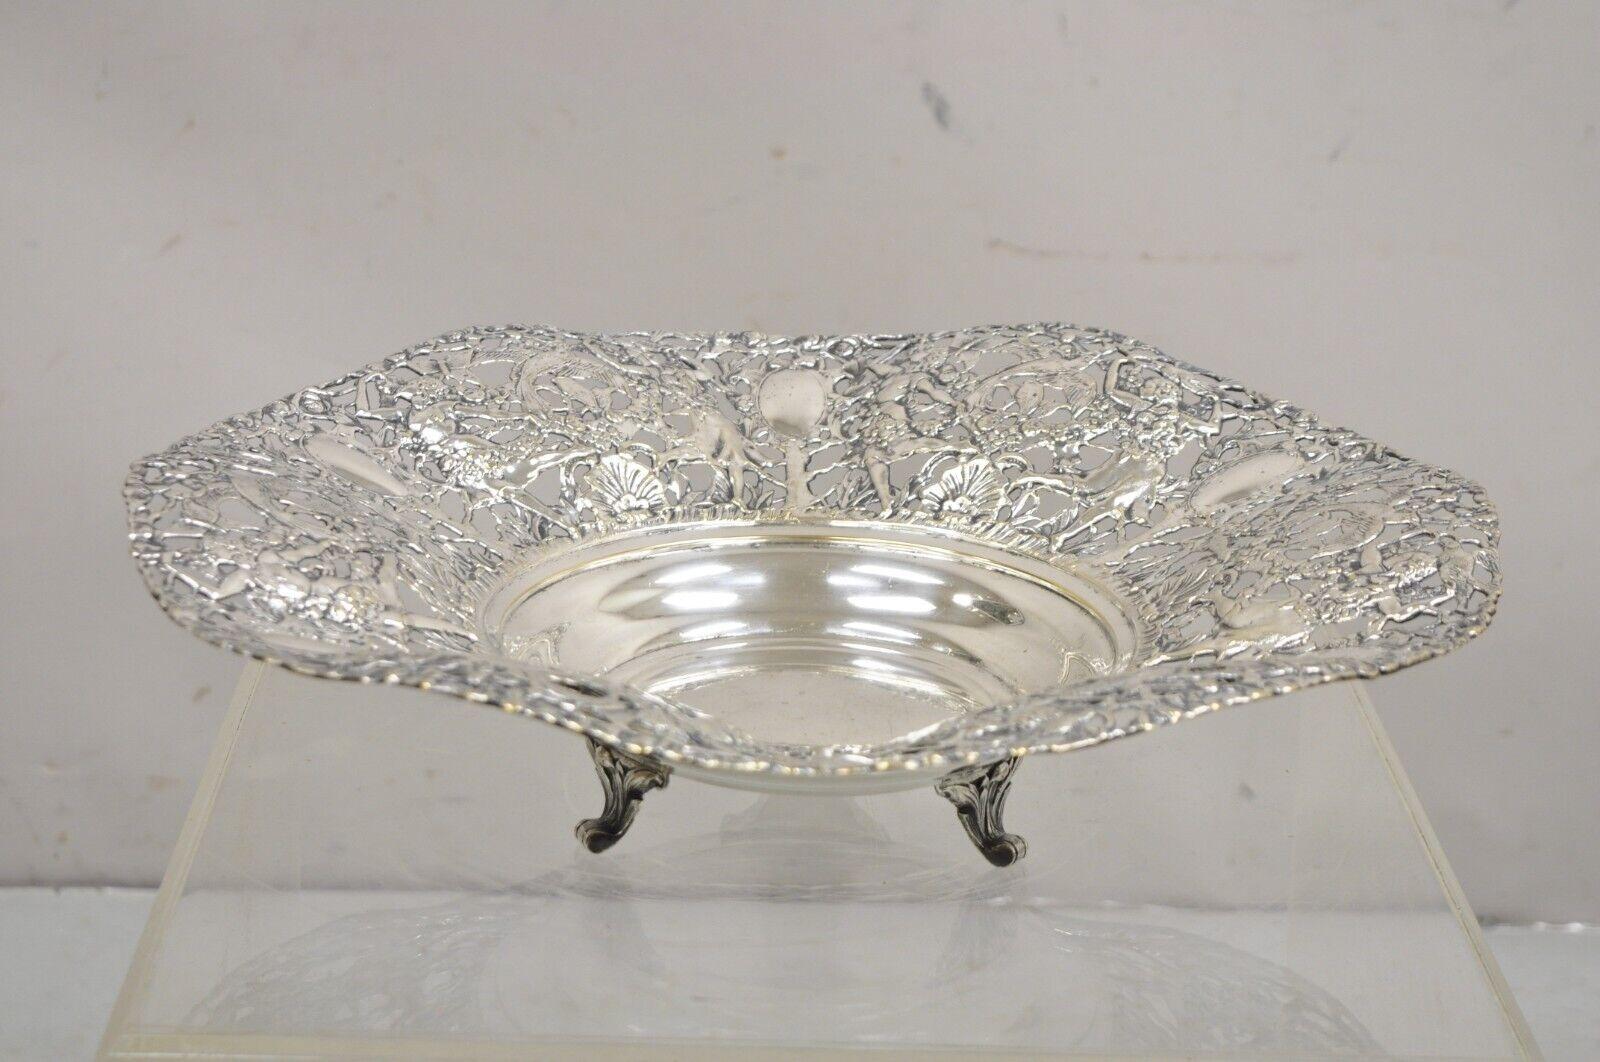 Vintage William Adams WA Spain Silver Plated Figural Repousse Large Footed Fruit Bowl. Item features Ornate females and birds throughout, pierced design, raised on feet, original hallmark, very nice vintage bowl. Circa Mid 20th Century.